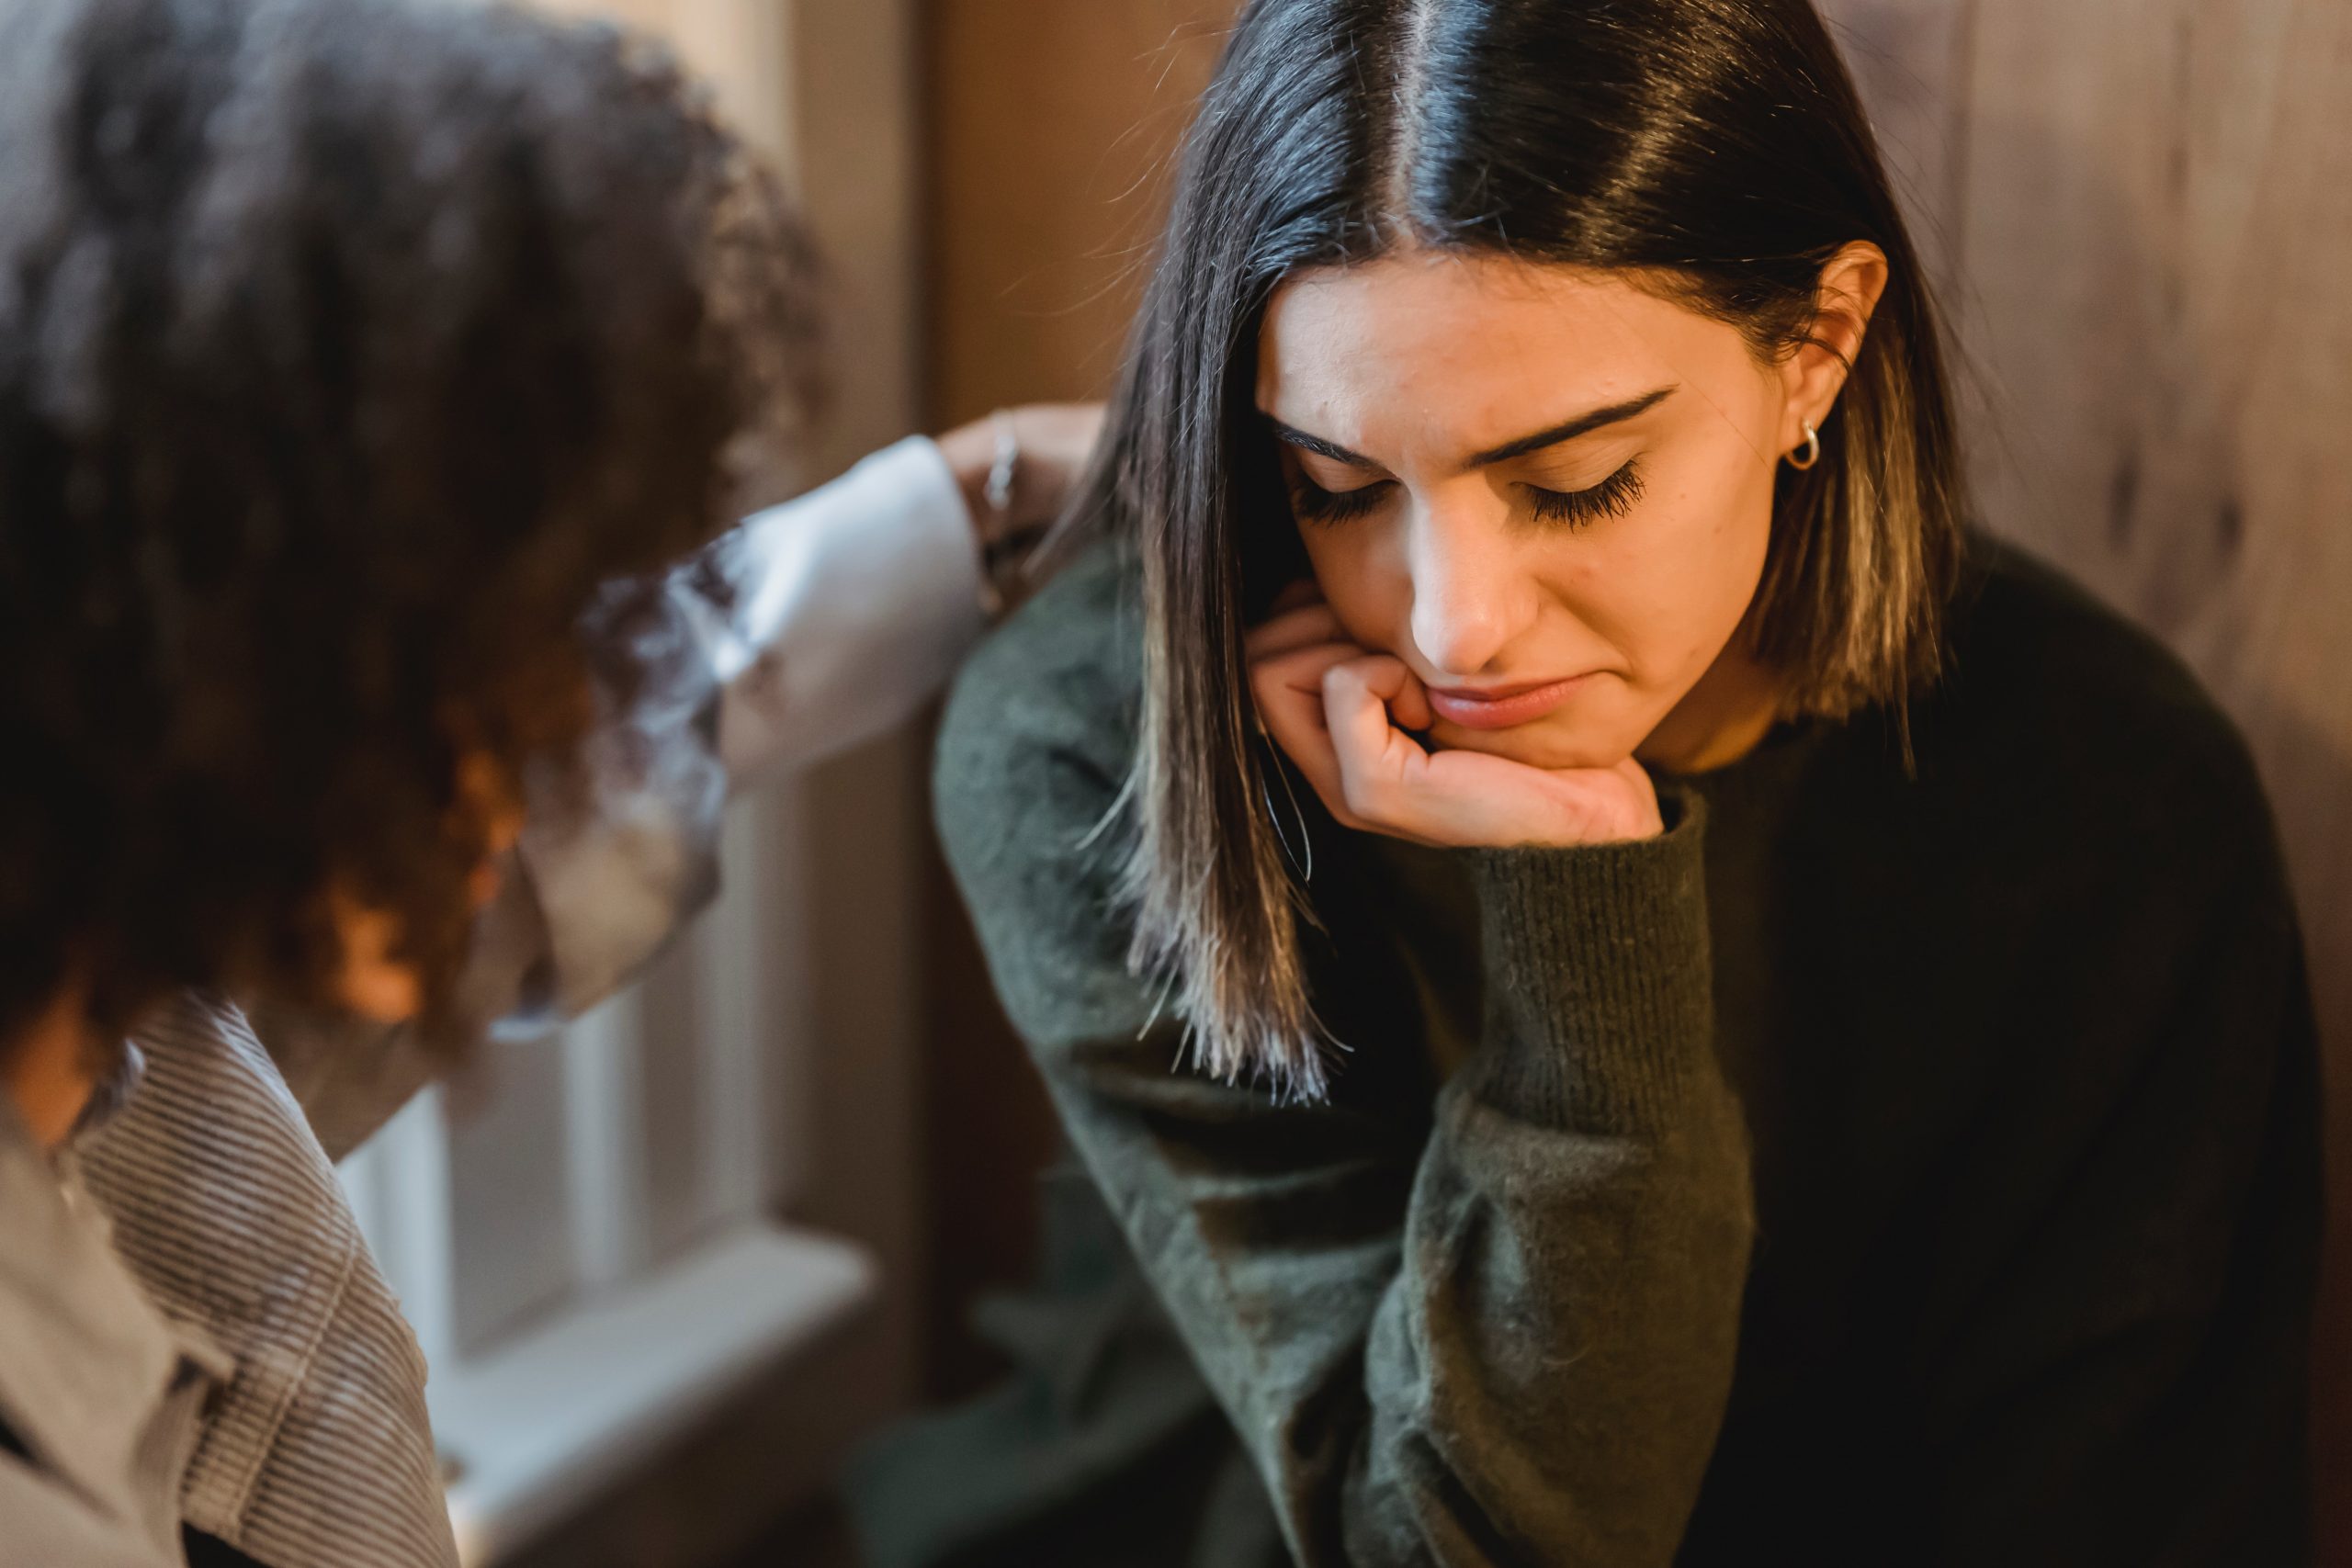 a woman counsels another woman experiencing negative emotions